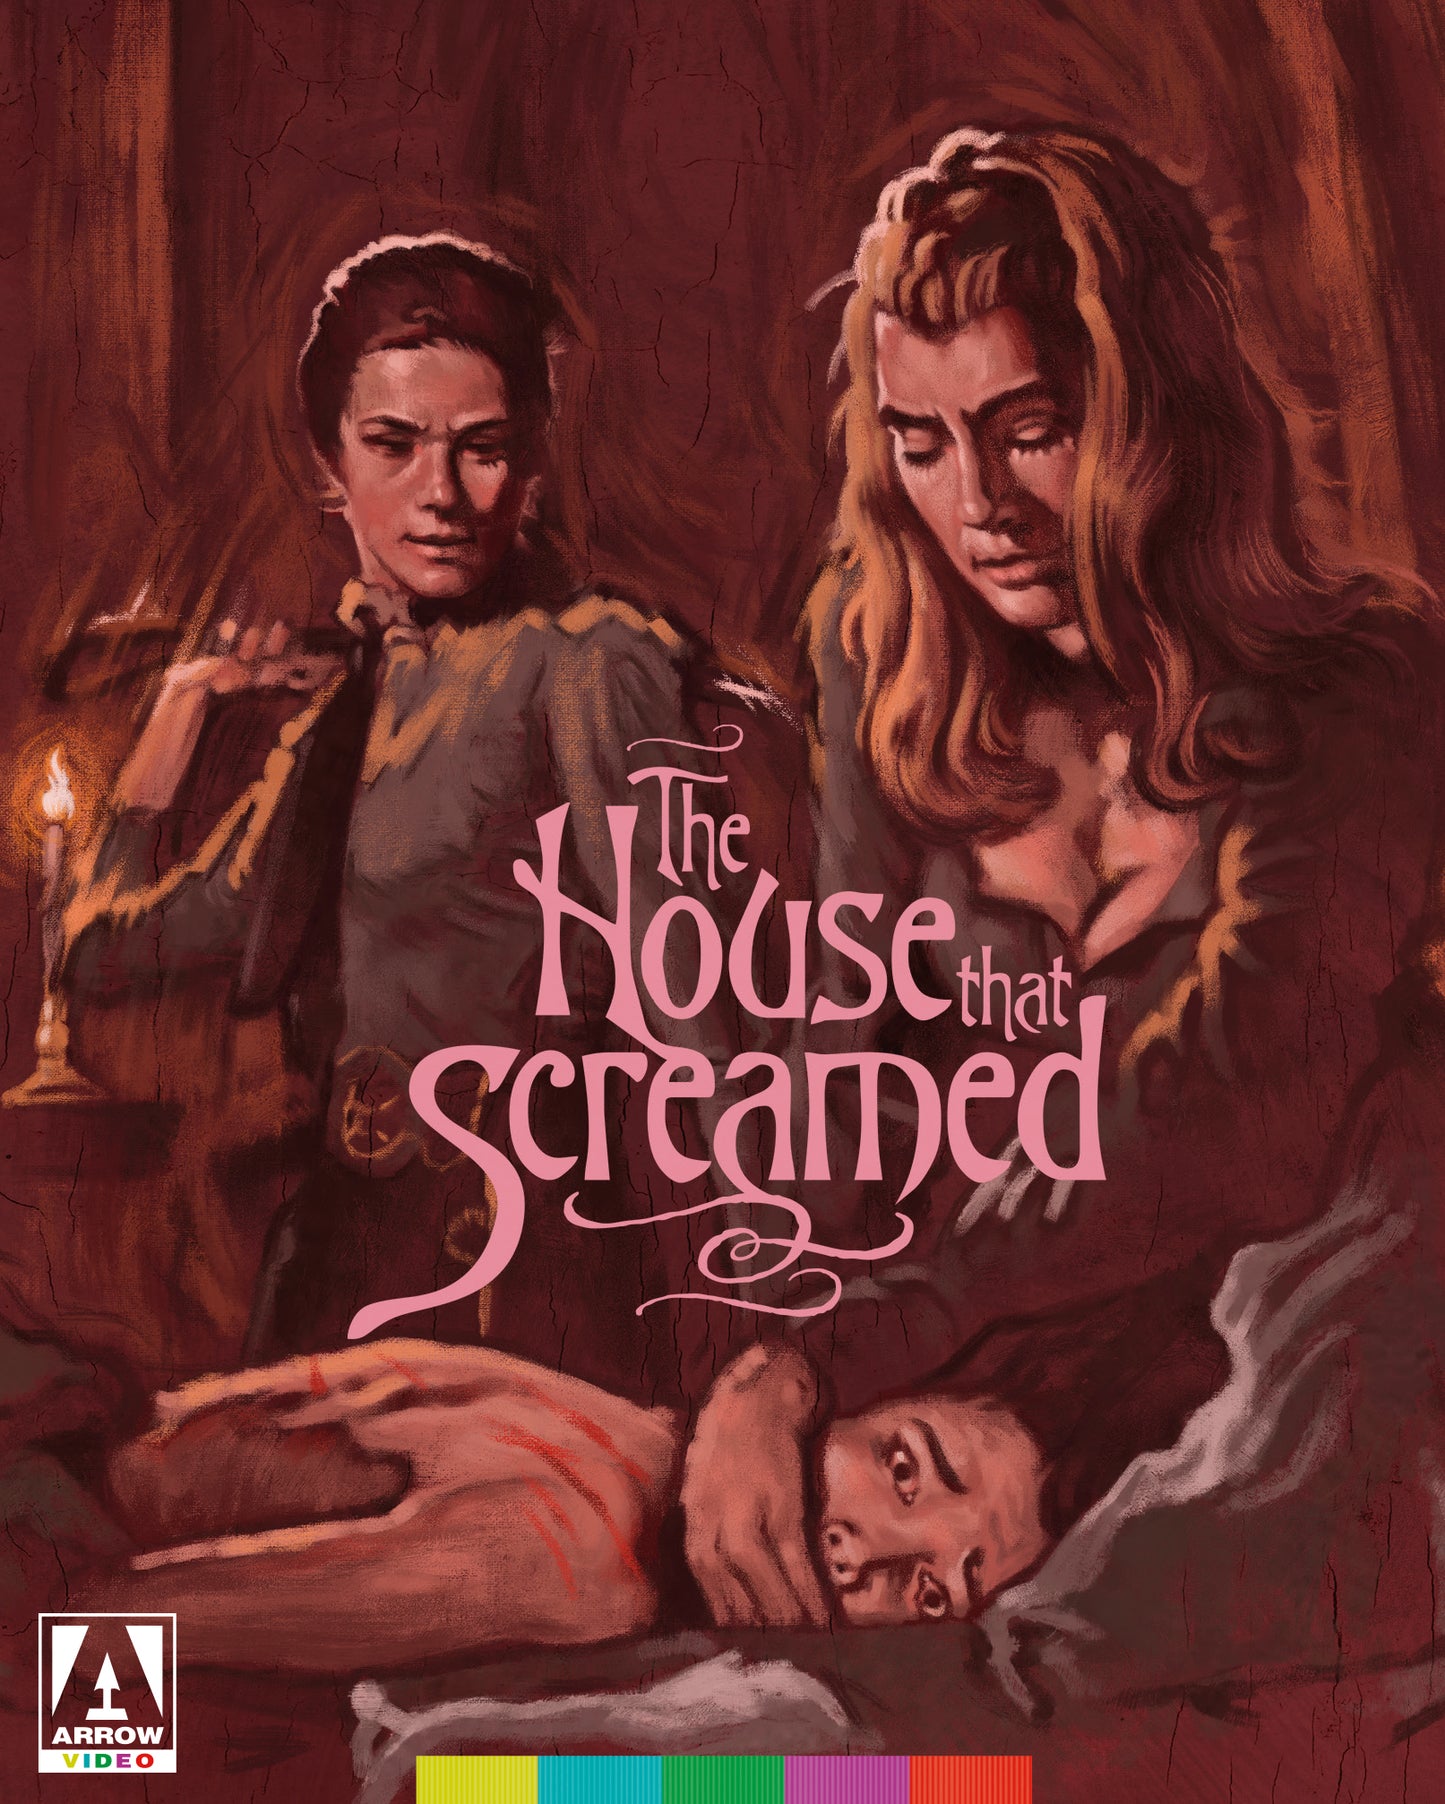 The House That Screamed Blu-ray with Slipcover (Arrow Video U.S.)